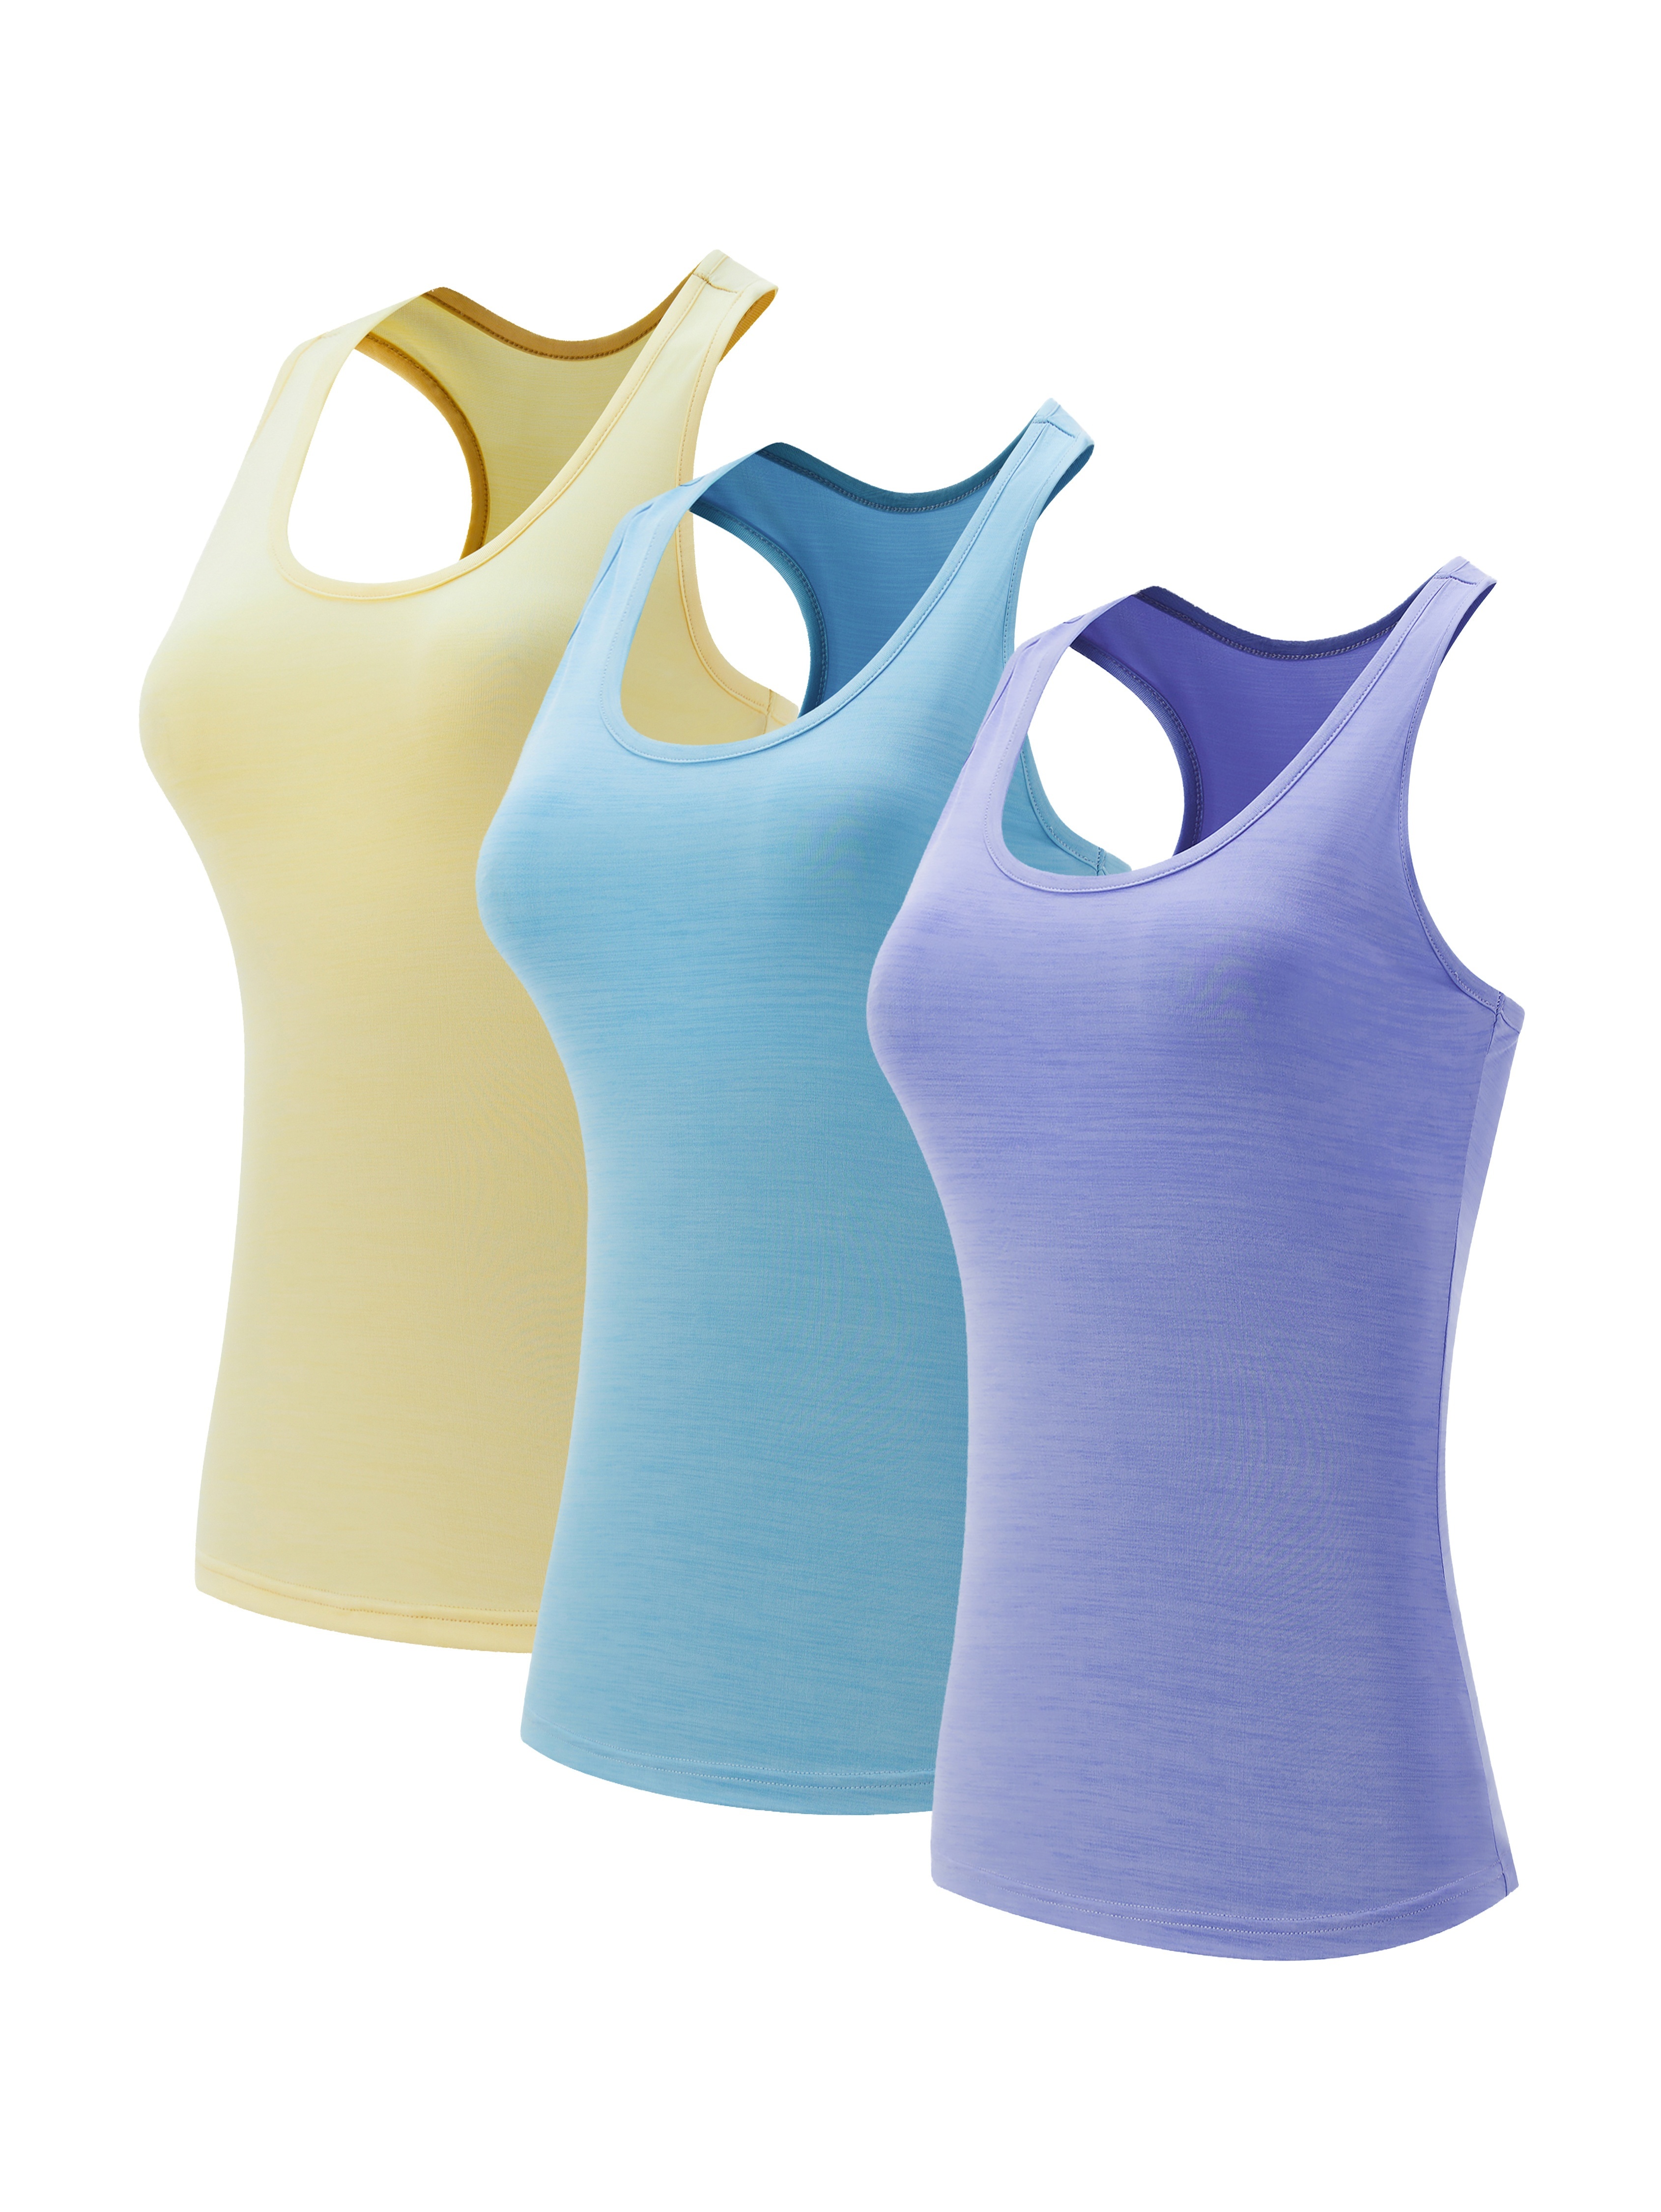 Workout Tank Tops For Women Built In Bra, Athletic Racerback Running Sports  Cami Tank Top, Women's Tops